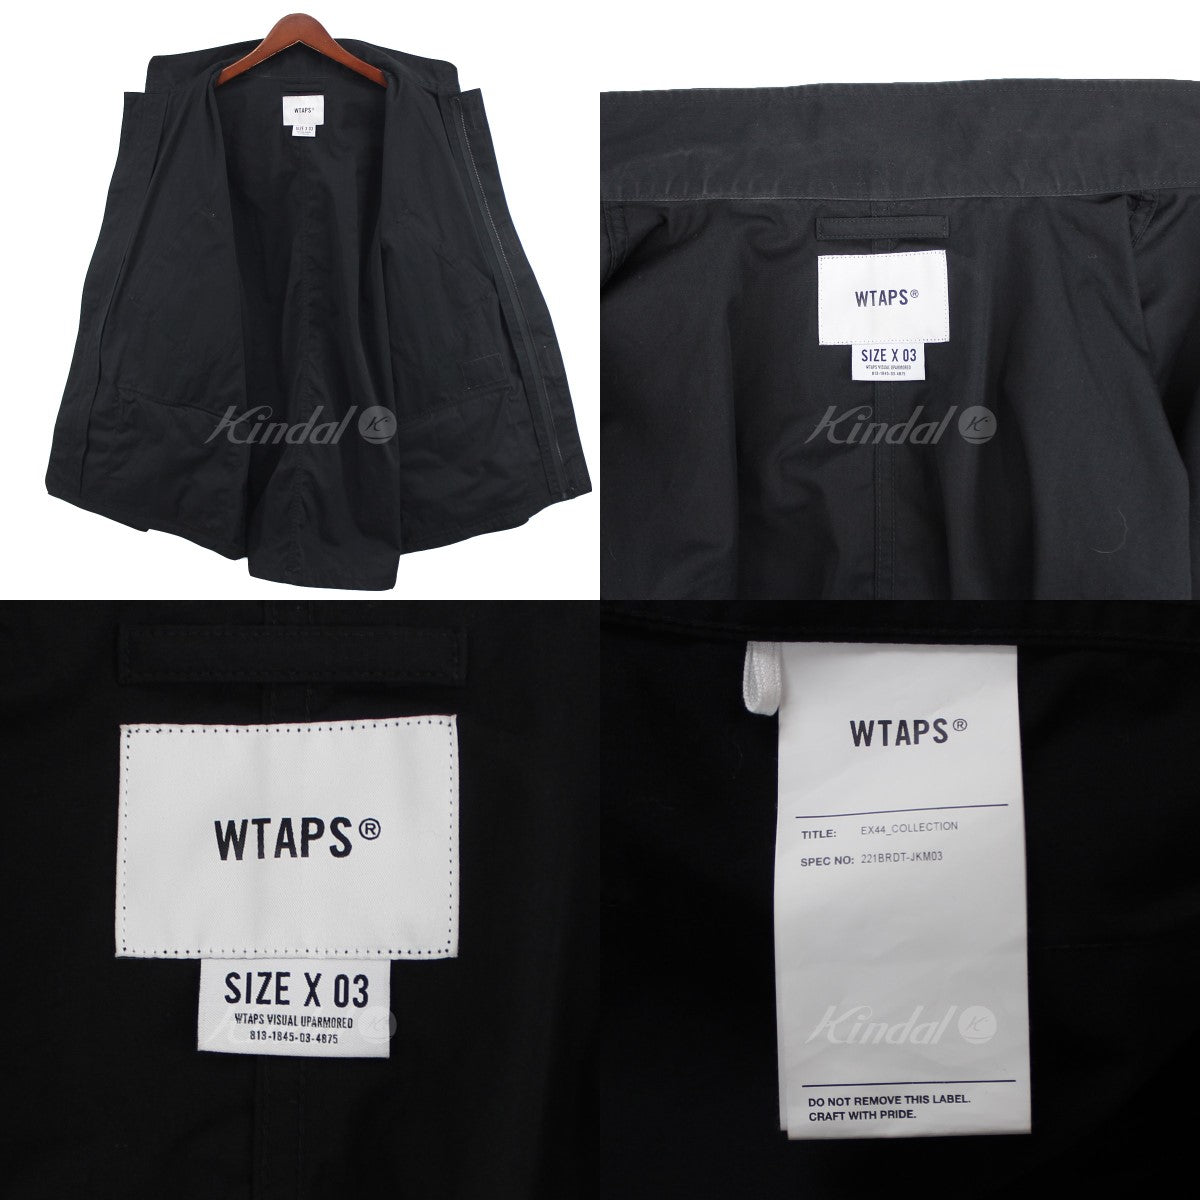 WTAPS(ダブルタップス) 22SS CONCEAL JACKET COPO WEATHER ジャケット